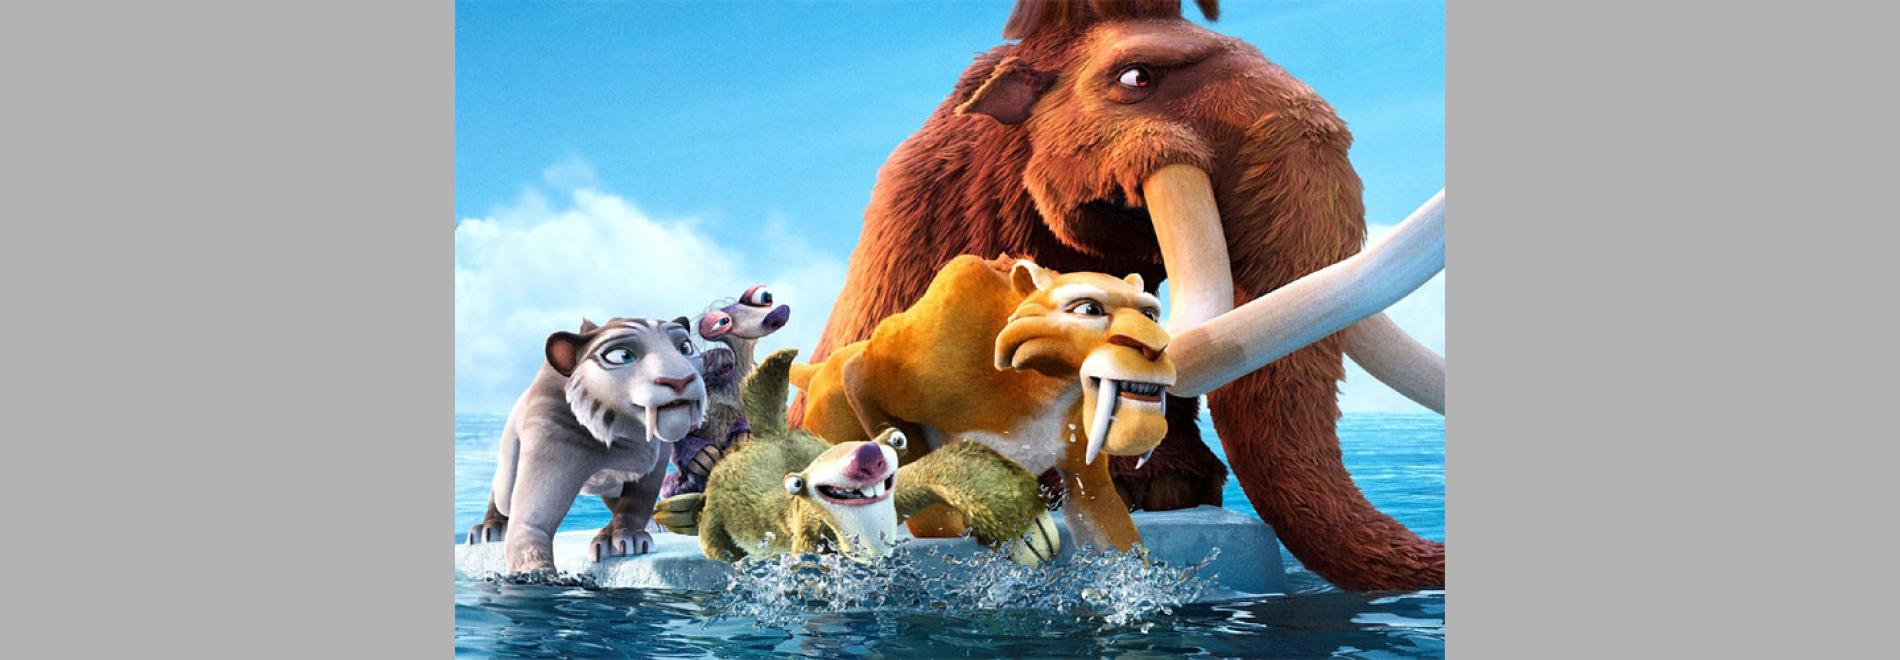 Ice Age: Collision Course (Ice Age 5) (Mike Thurmeier, Galen T. Chu, 2016)